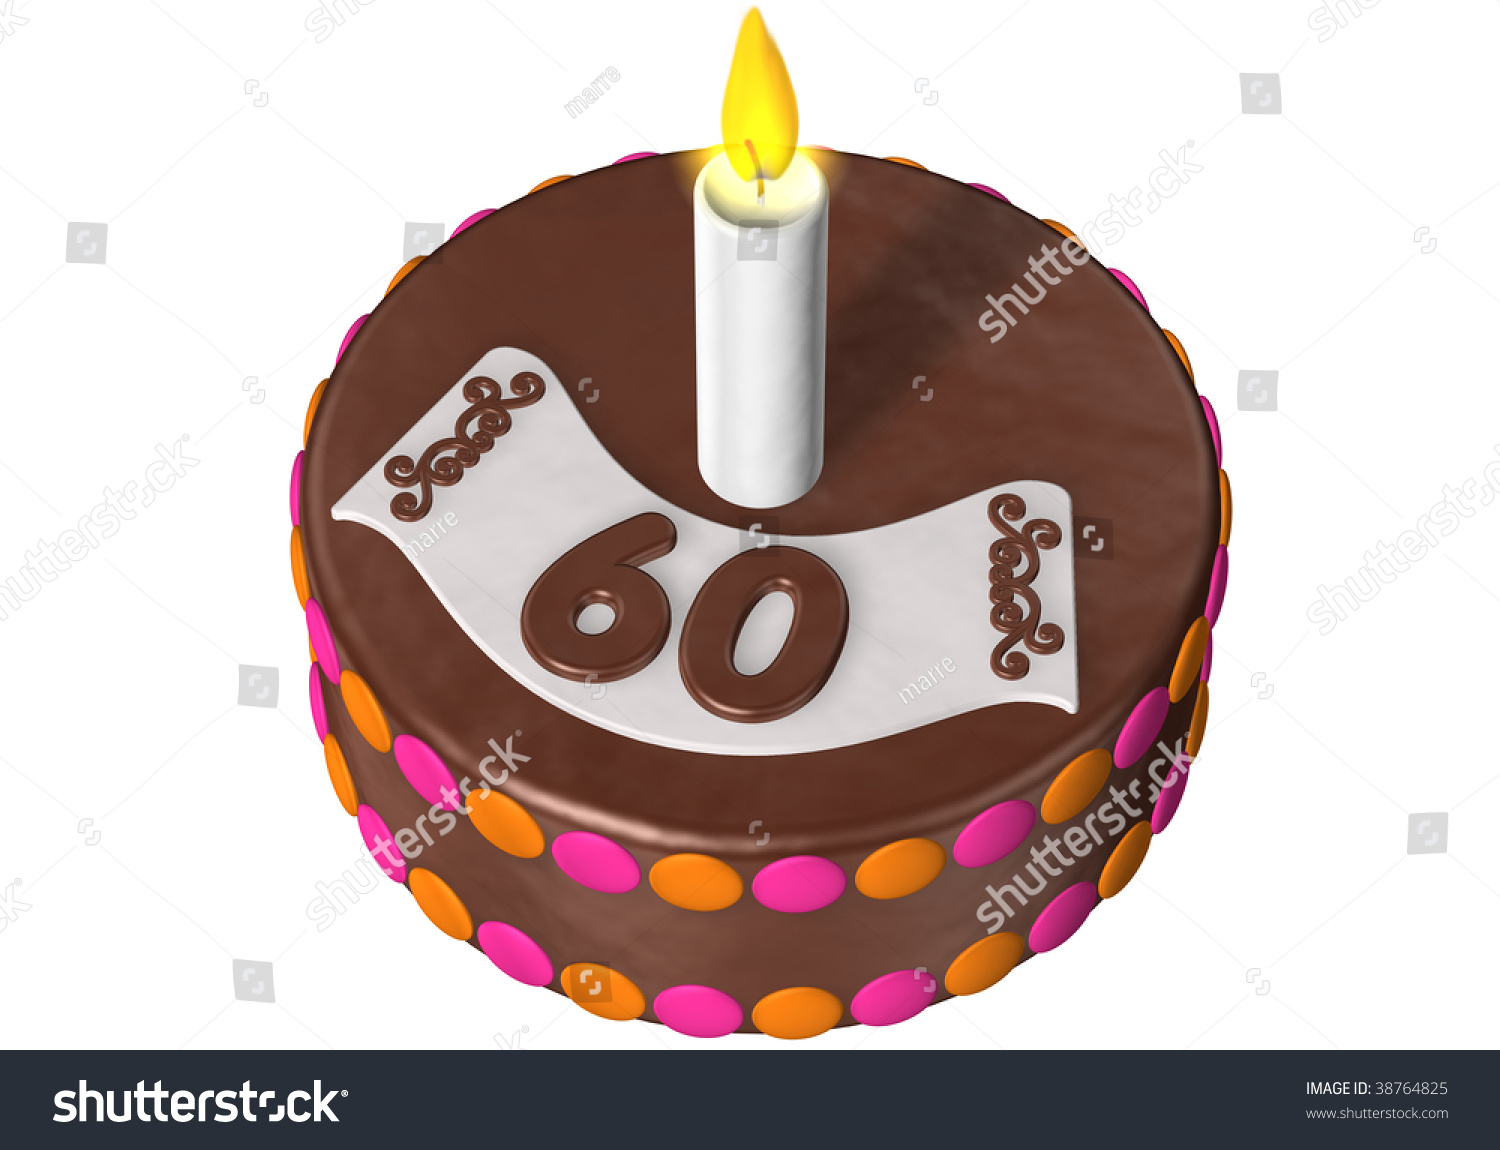 Birthday Cake With The Number 60 Stock Photo 38764825 : Shutterstock